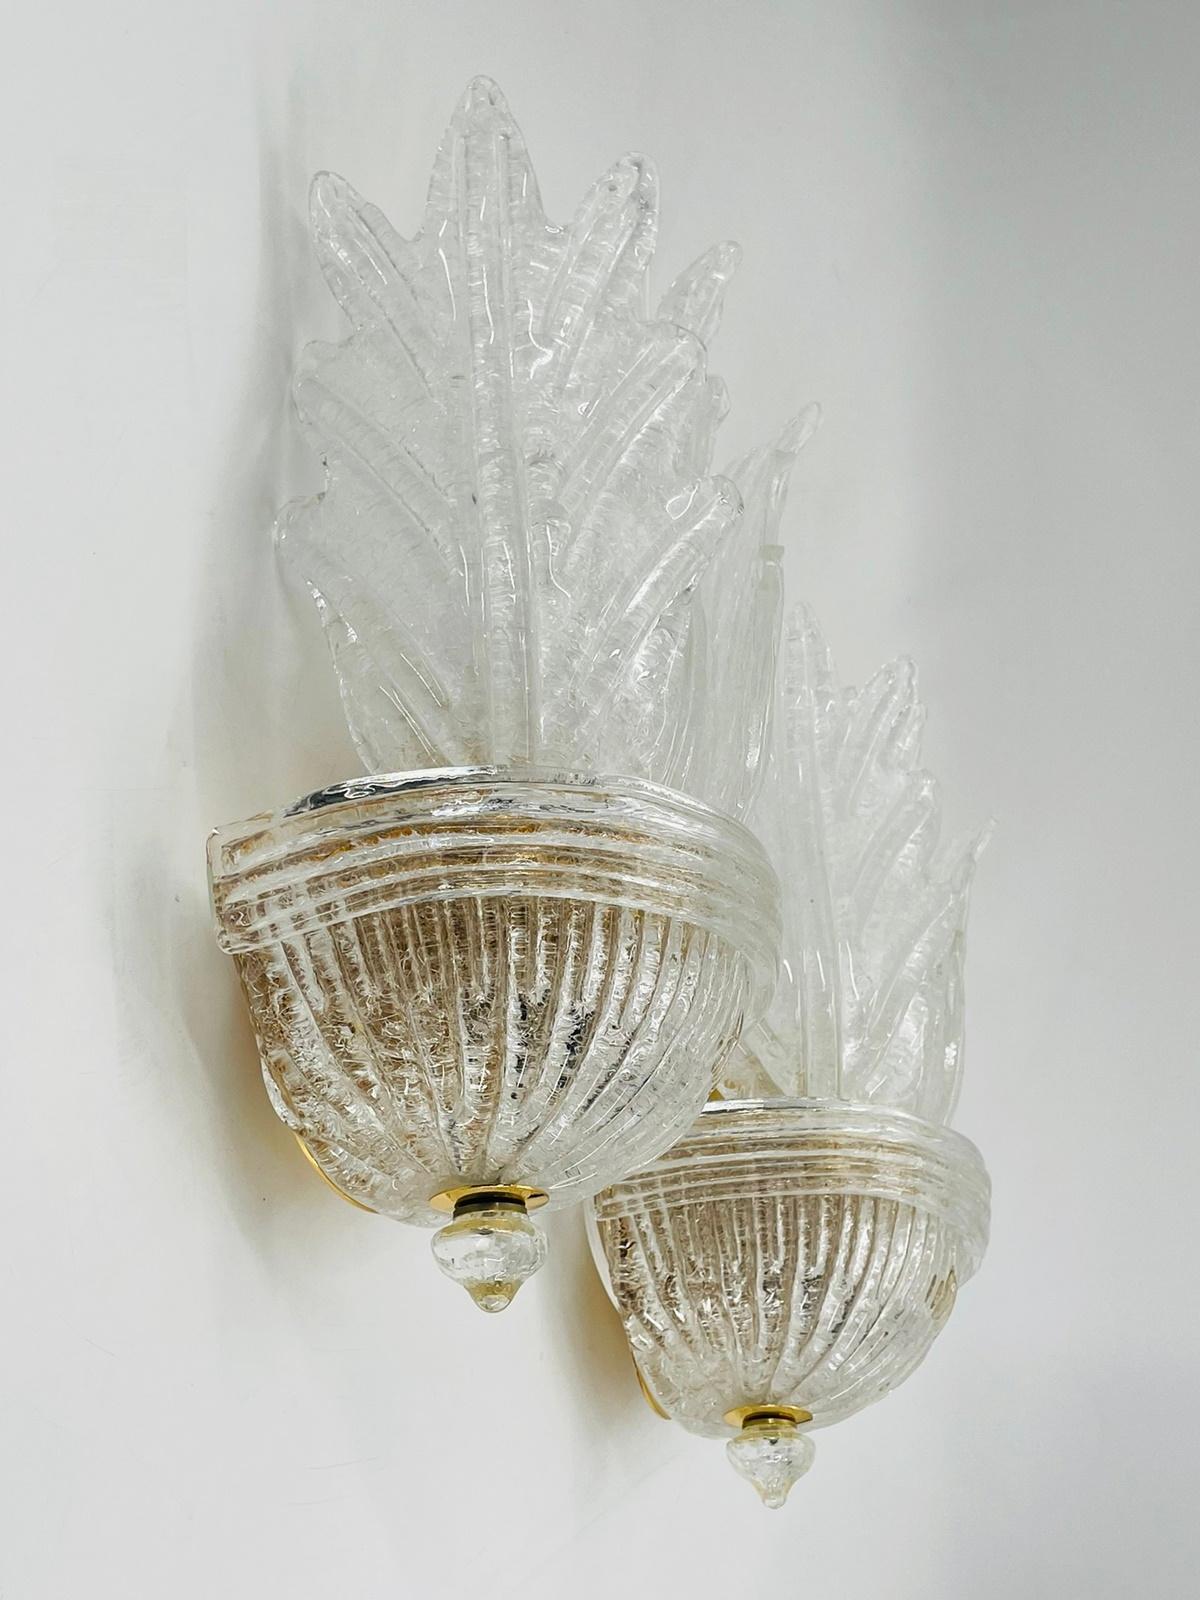 Pair of Murano Glass & Brass Sconces by Italamp S.R.L. Italy 2006 For Sale 9